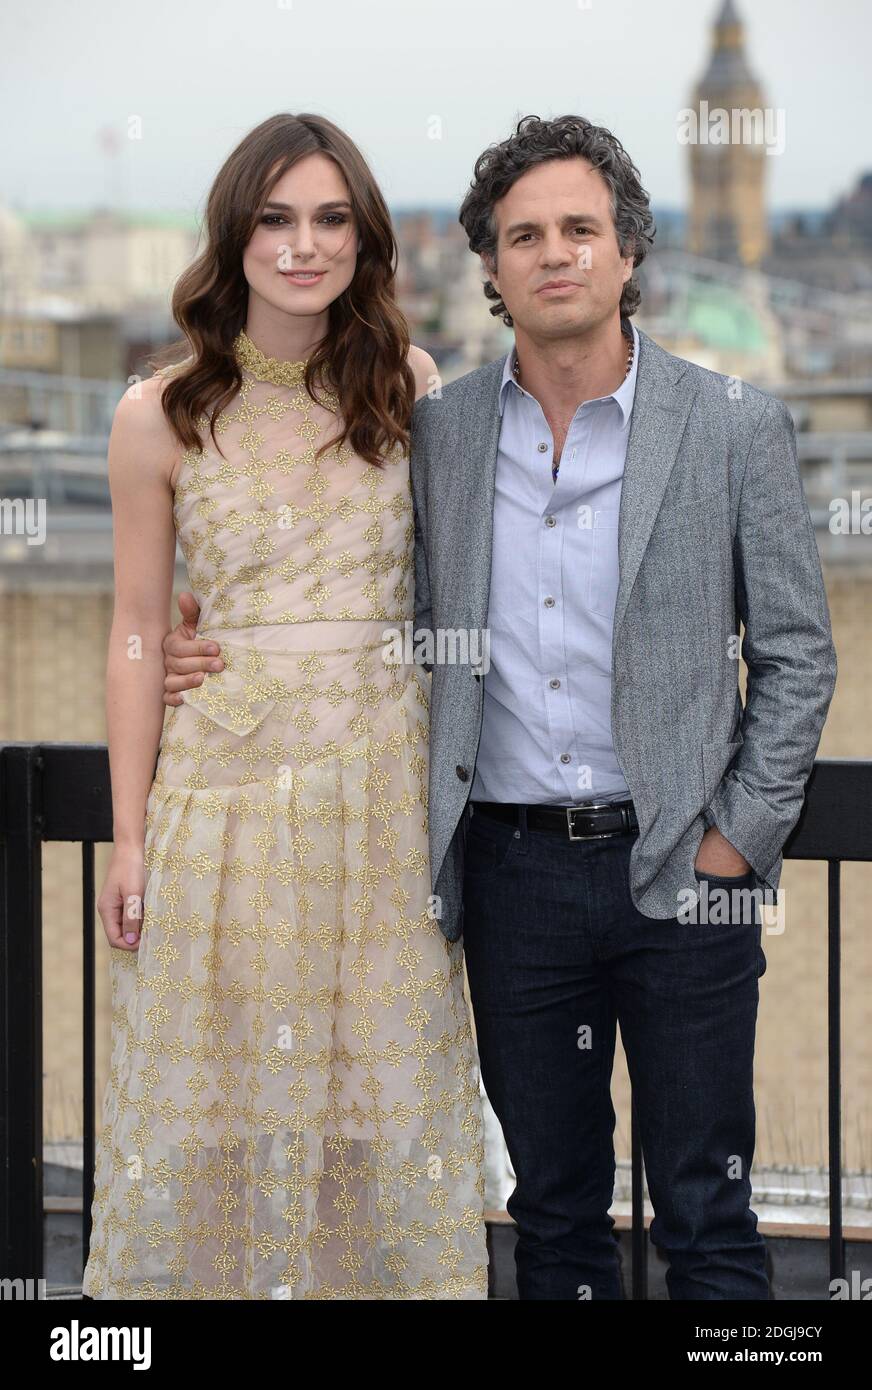 Keira Knightley and Mark Ruffalo at the photocall for Begin Again, Picturehouse Cinemas, Leicester Square, London Stock Photo